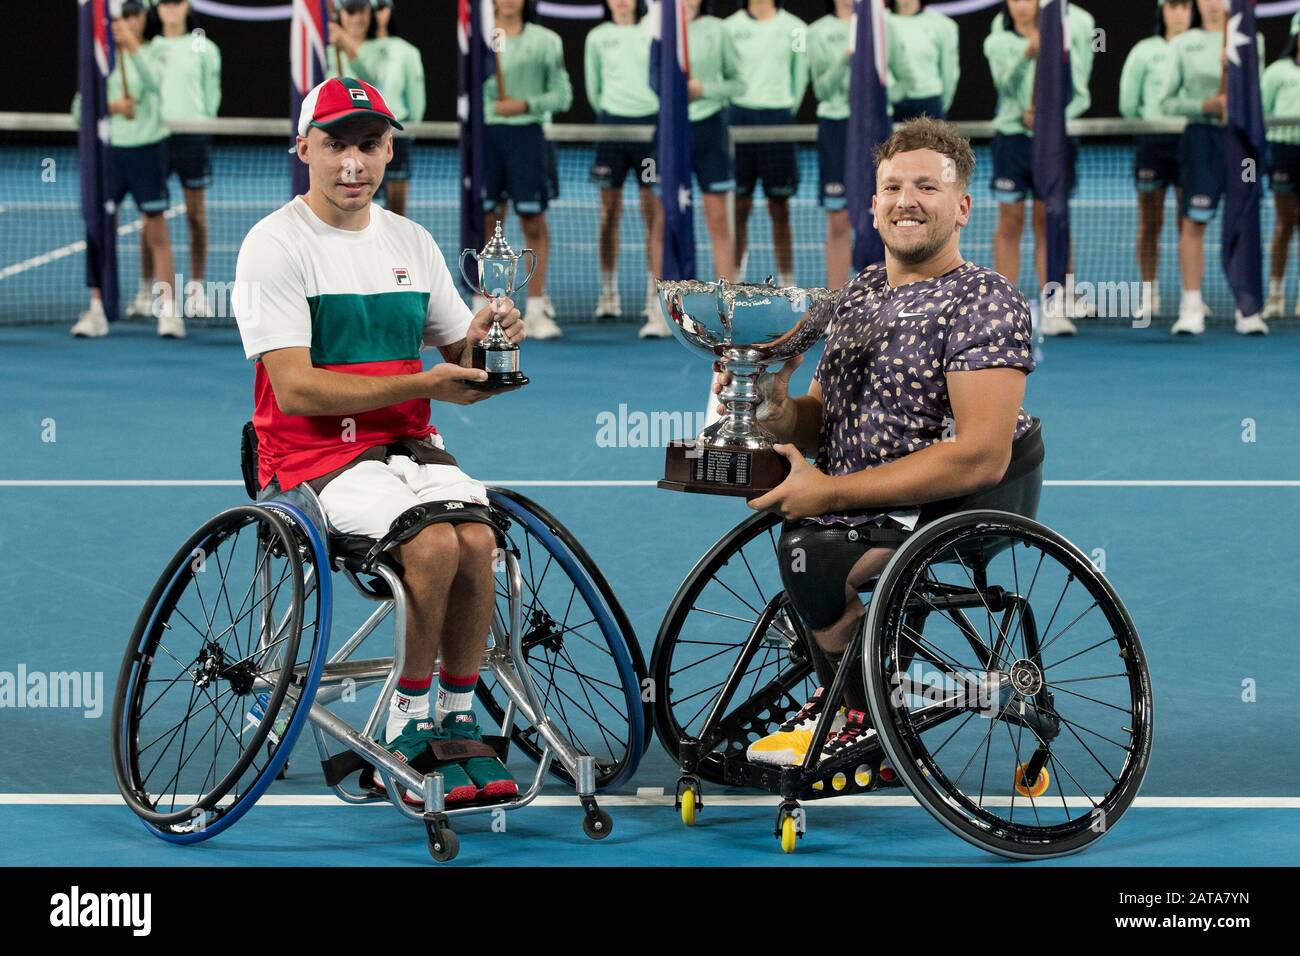 Melbourne, Australia. 01st Feb, 2020. Dylan Alcott of Australia defeated  Andy Lapthorne of UK at the Men's Quad Wheelchair Singles Final at the ATP Australian  Open 2020 at Melbourne Park, Melbourne, Australia